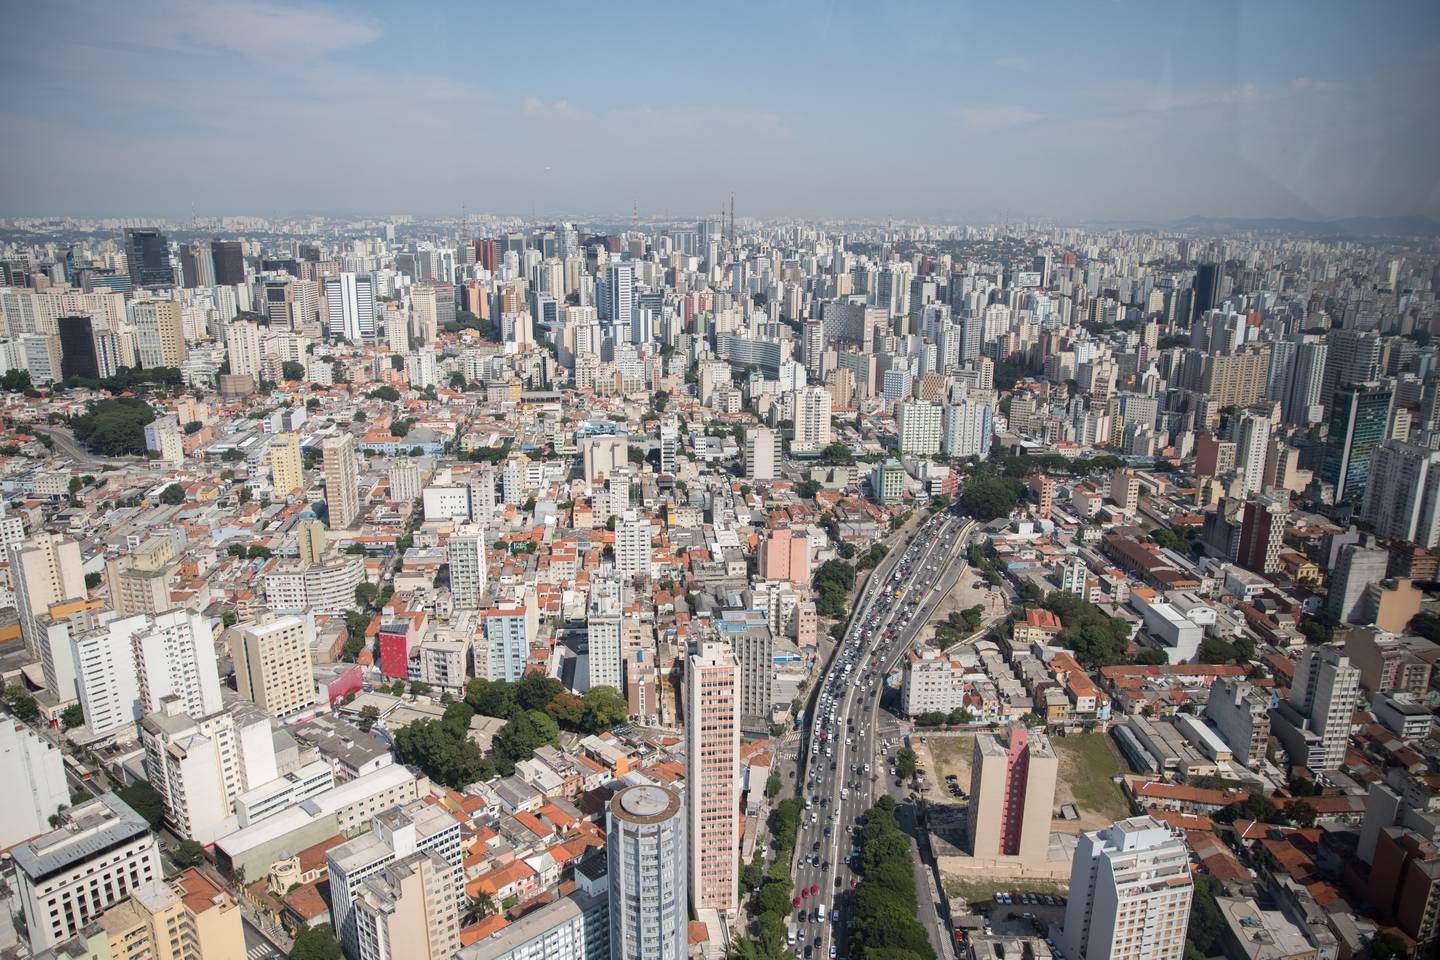 São Paulo, Brazil's financial capital and one of the region's most dynamic startup hubs.